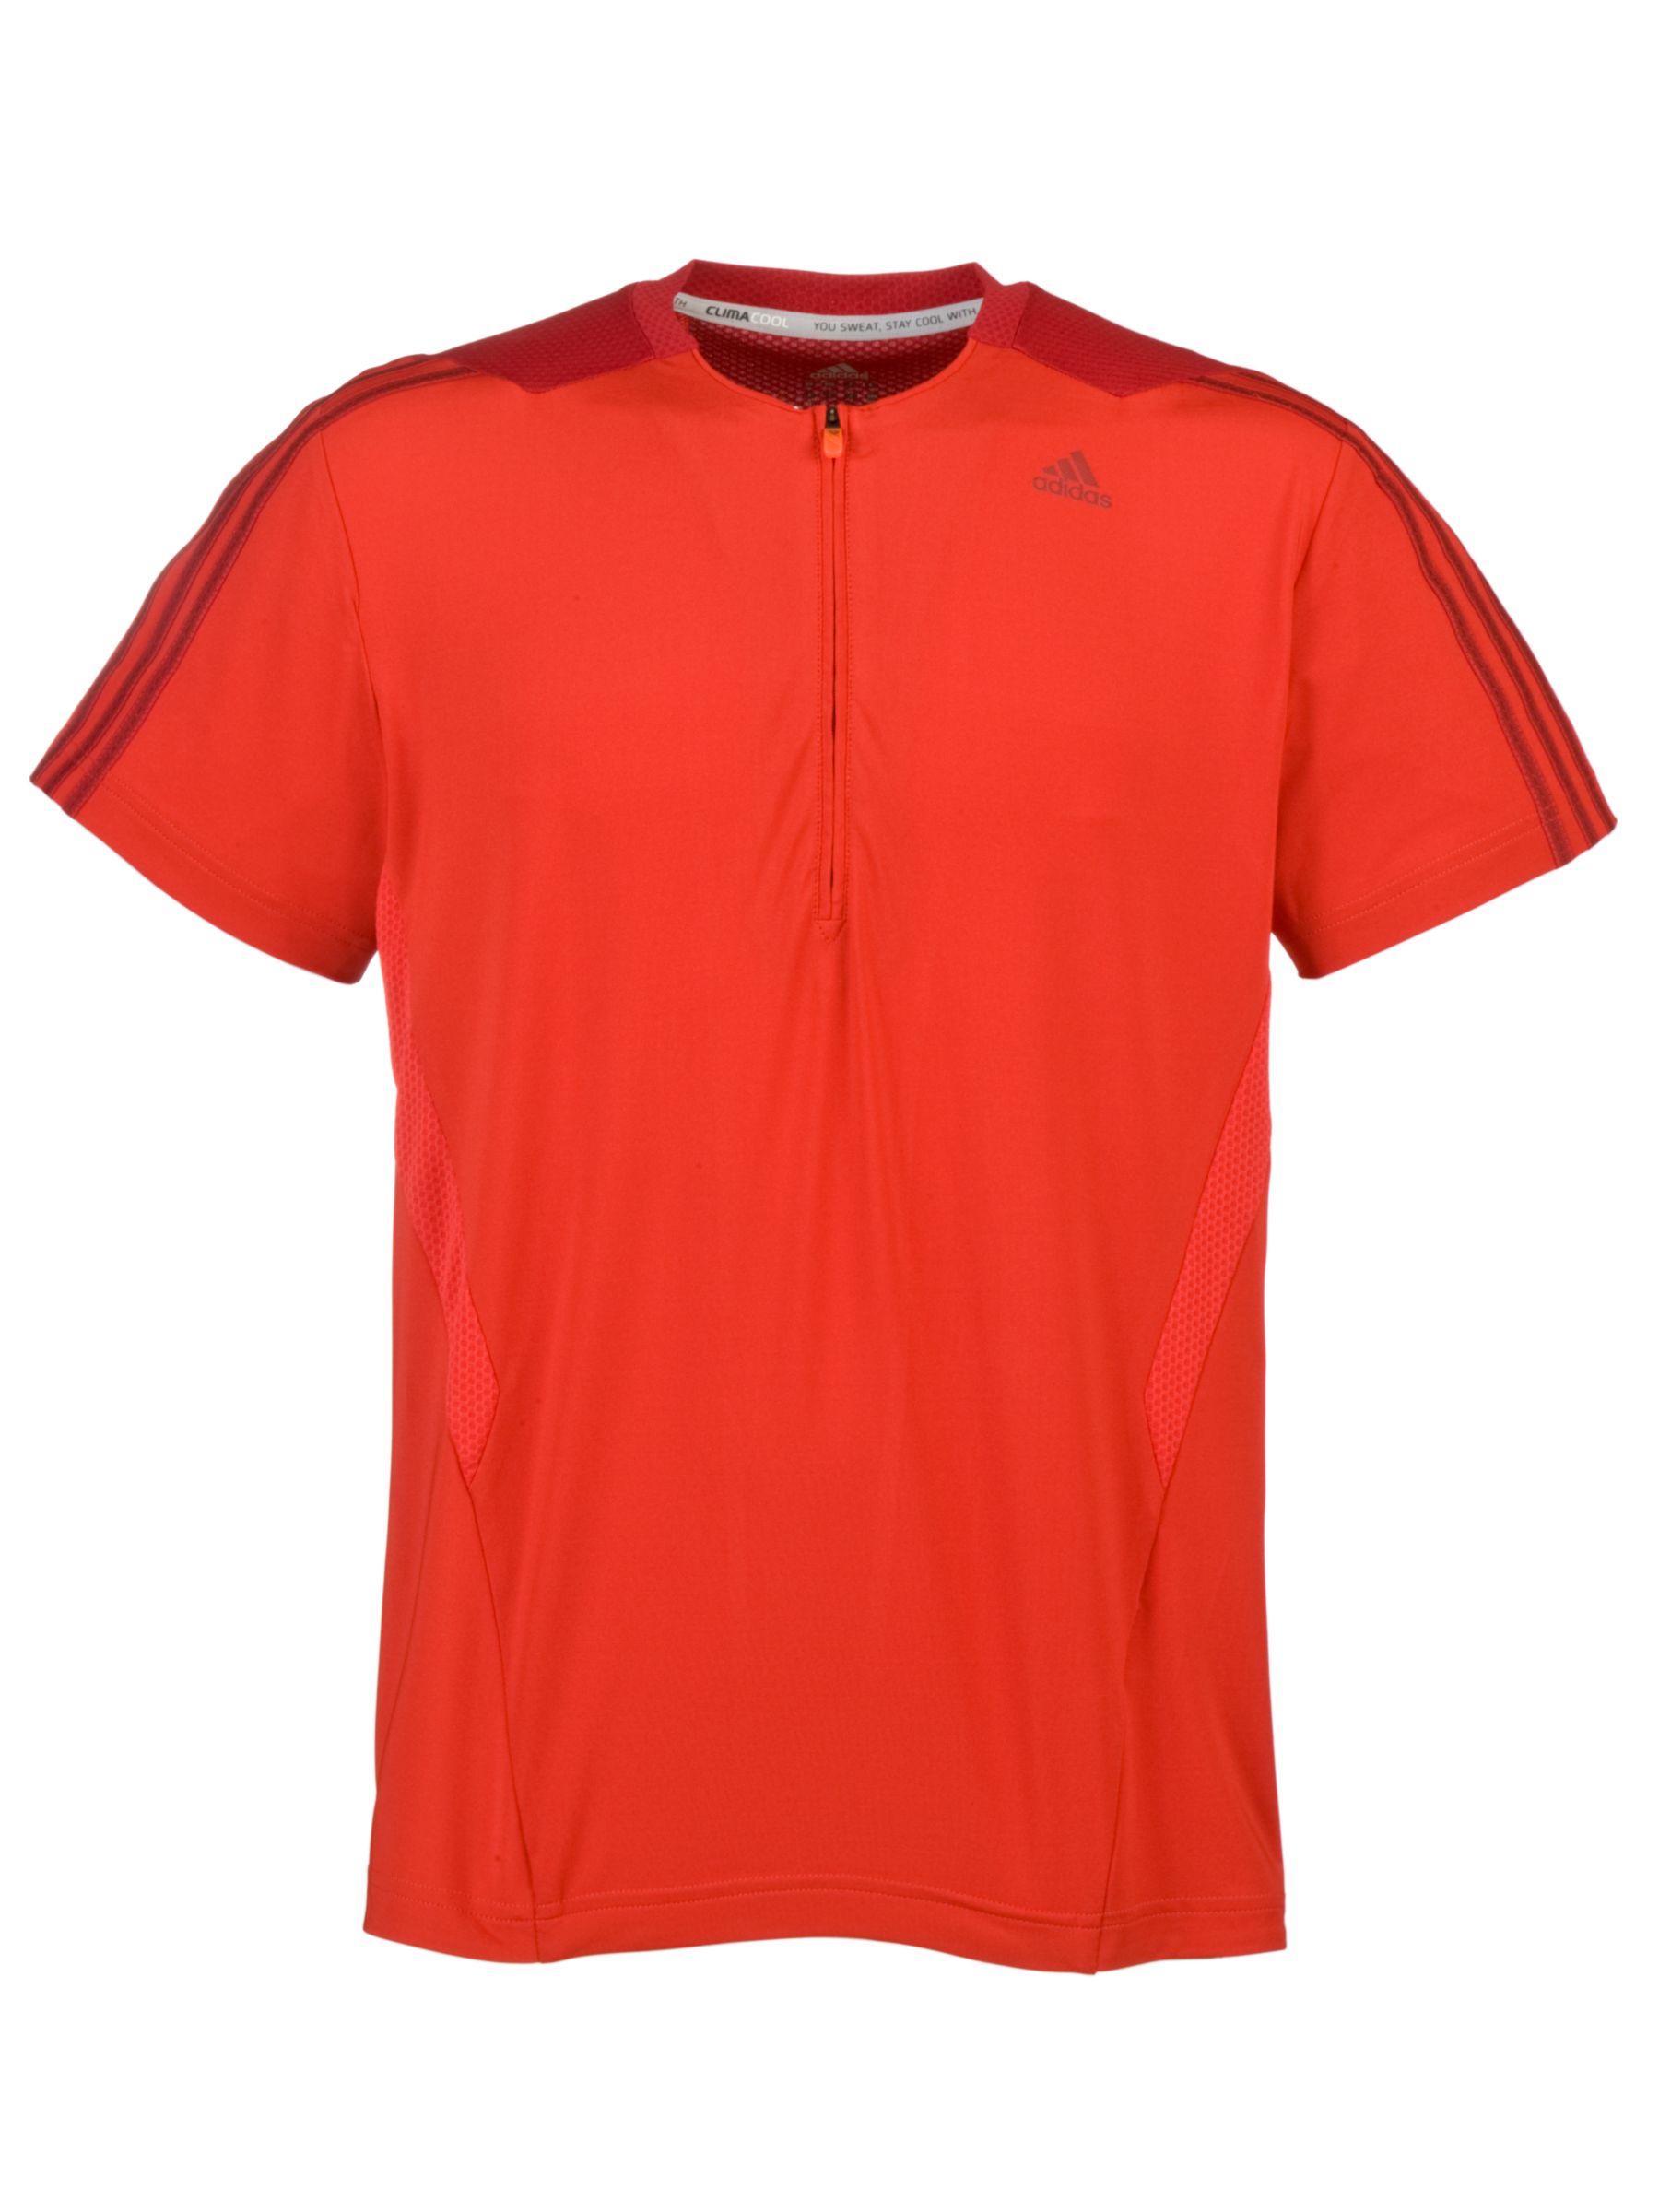 Clima365 Indoor Cycling T-Shirt, Red